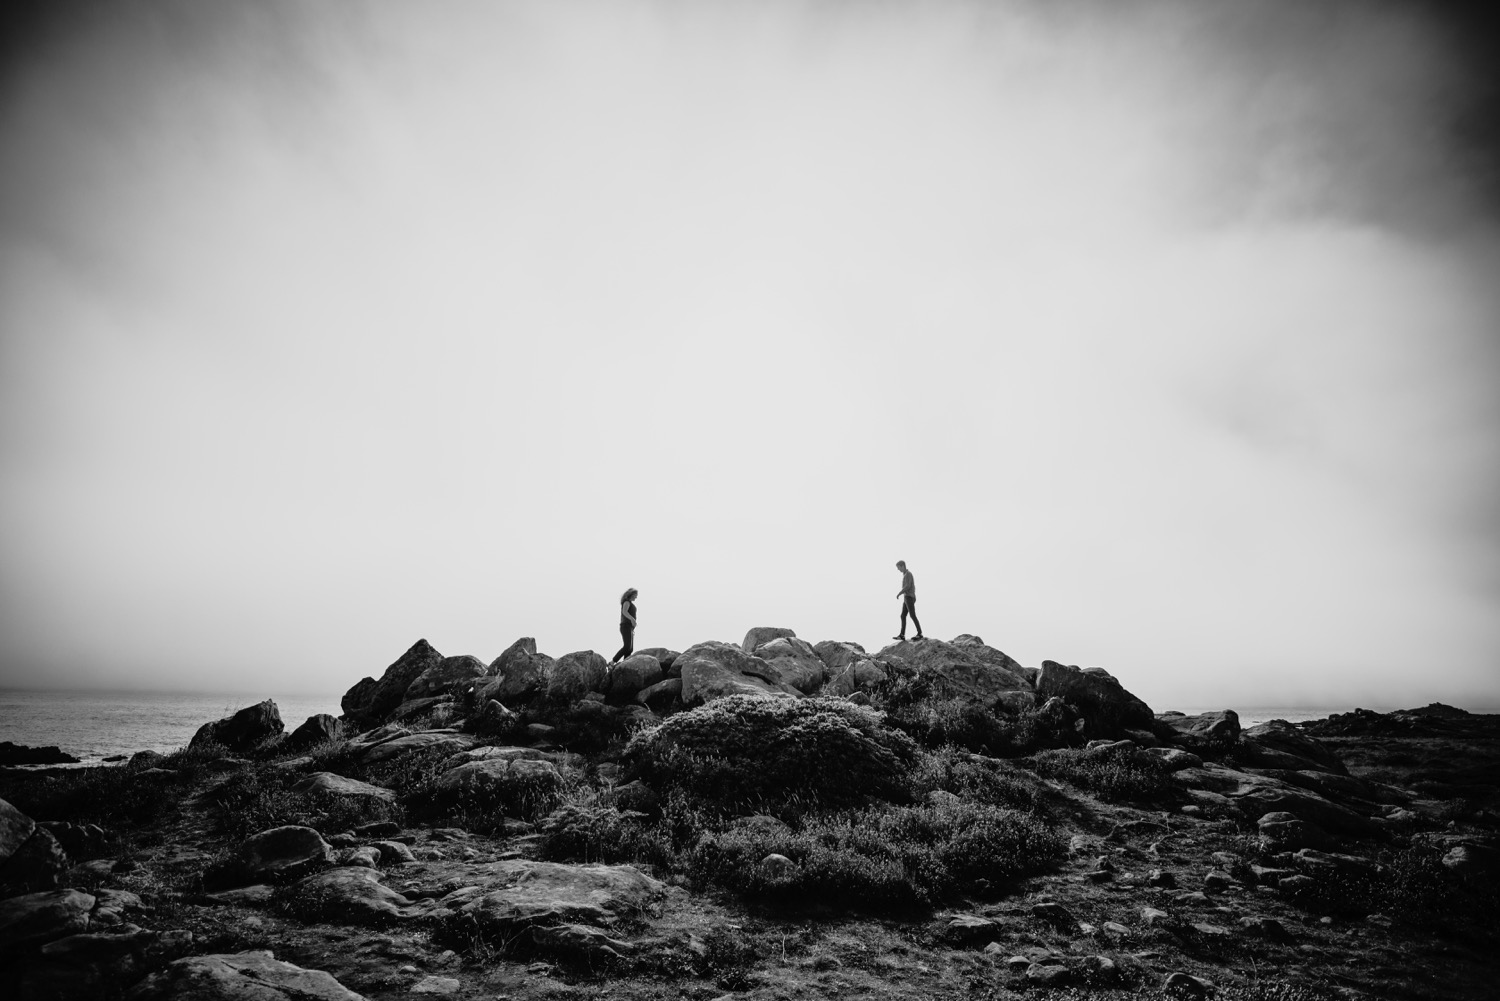 Black and white image of a couple walking towards each other over large boulders in Salt Point Park, CA